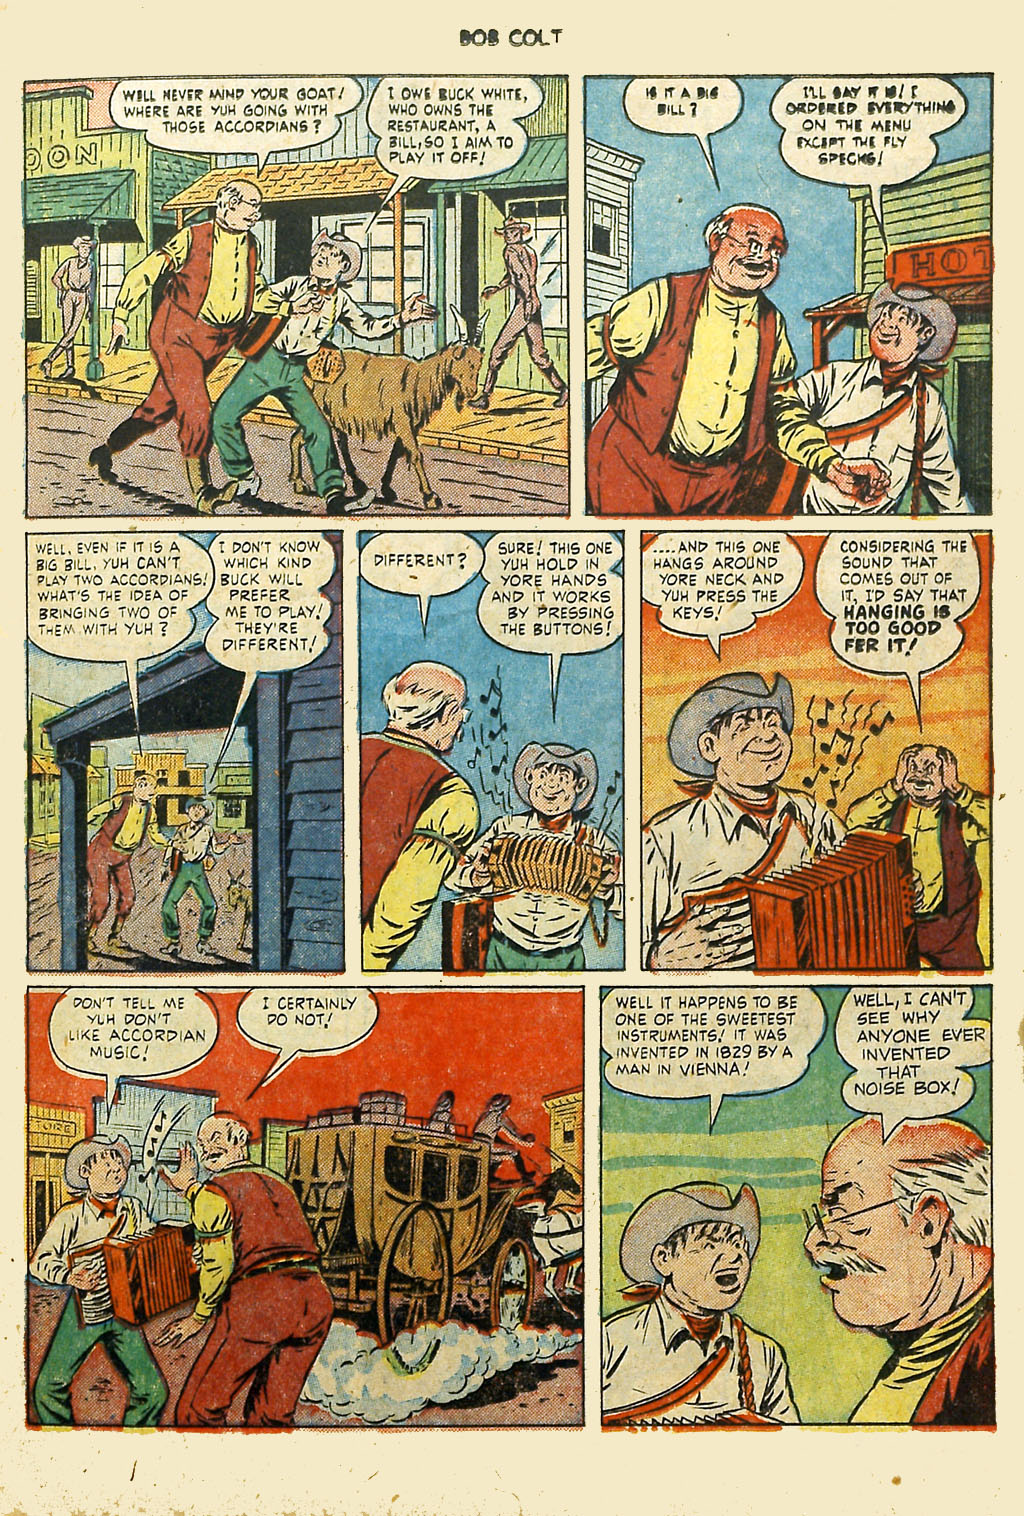 Read online Bob Colt Western comic -  Issue #2 - 25